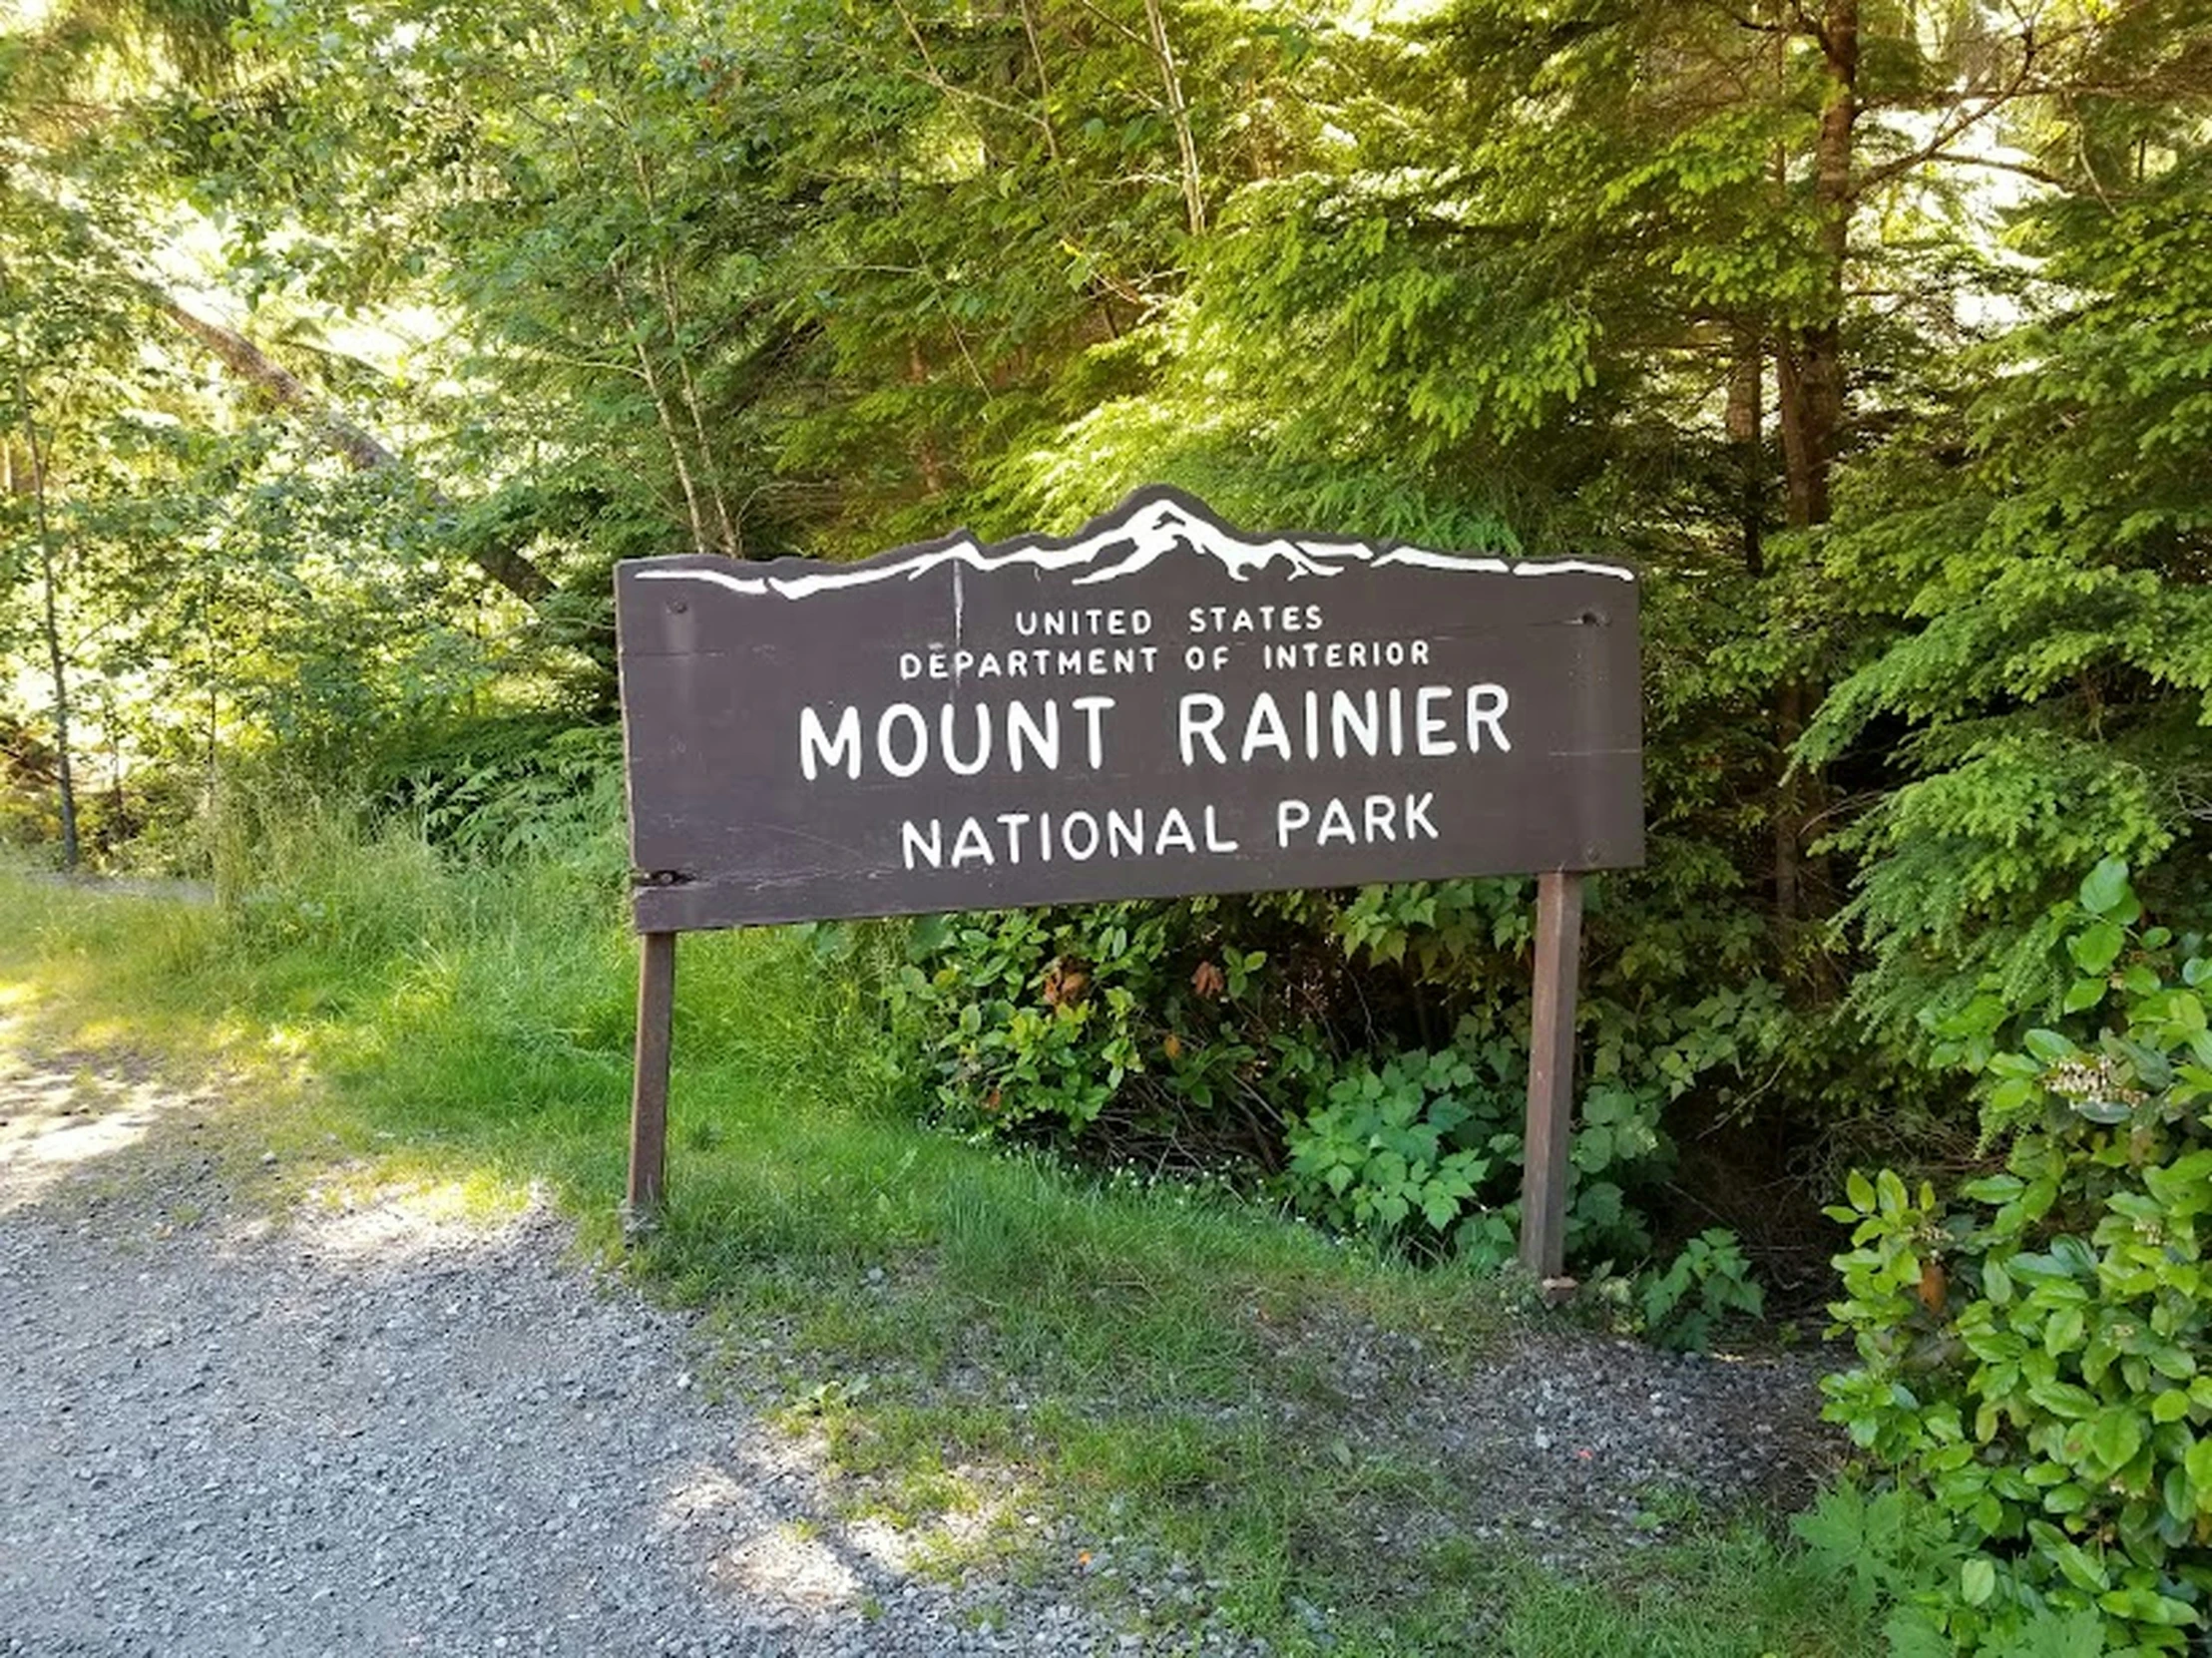 a sign on the side of the road showing that the mount rainier national park is open